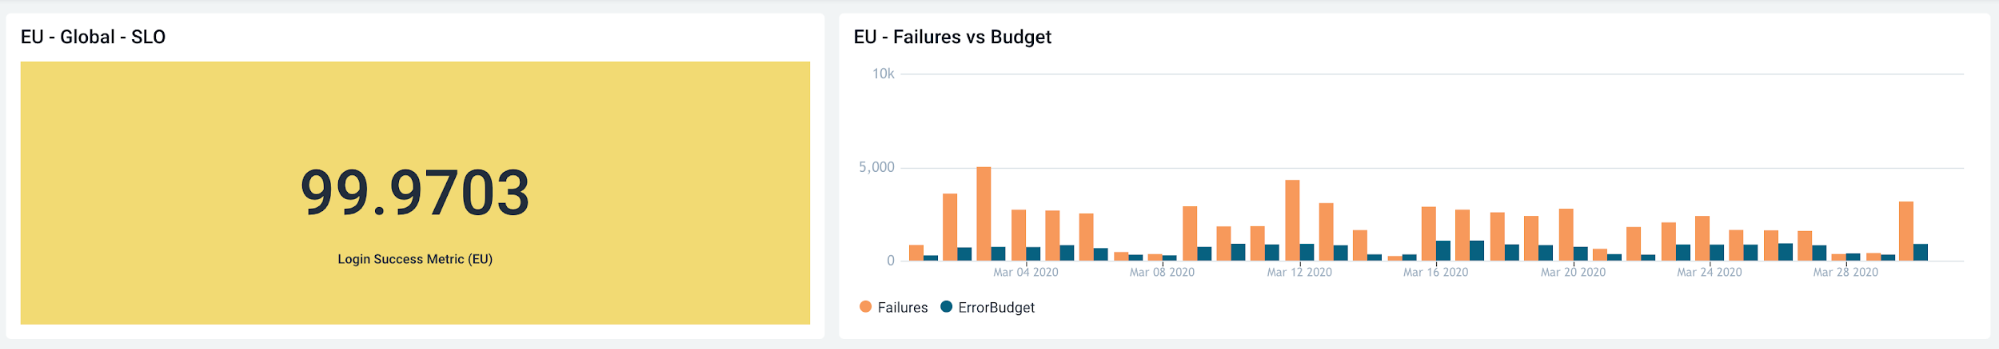 Failures vs budget in US